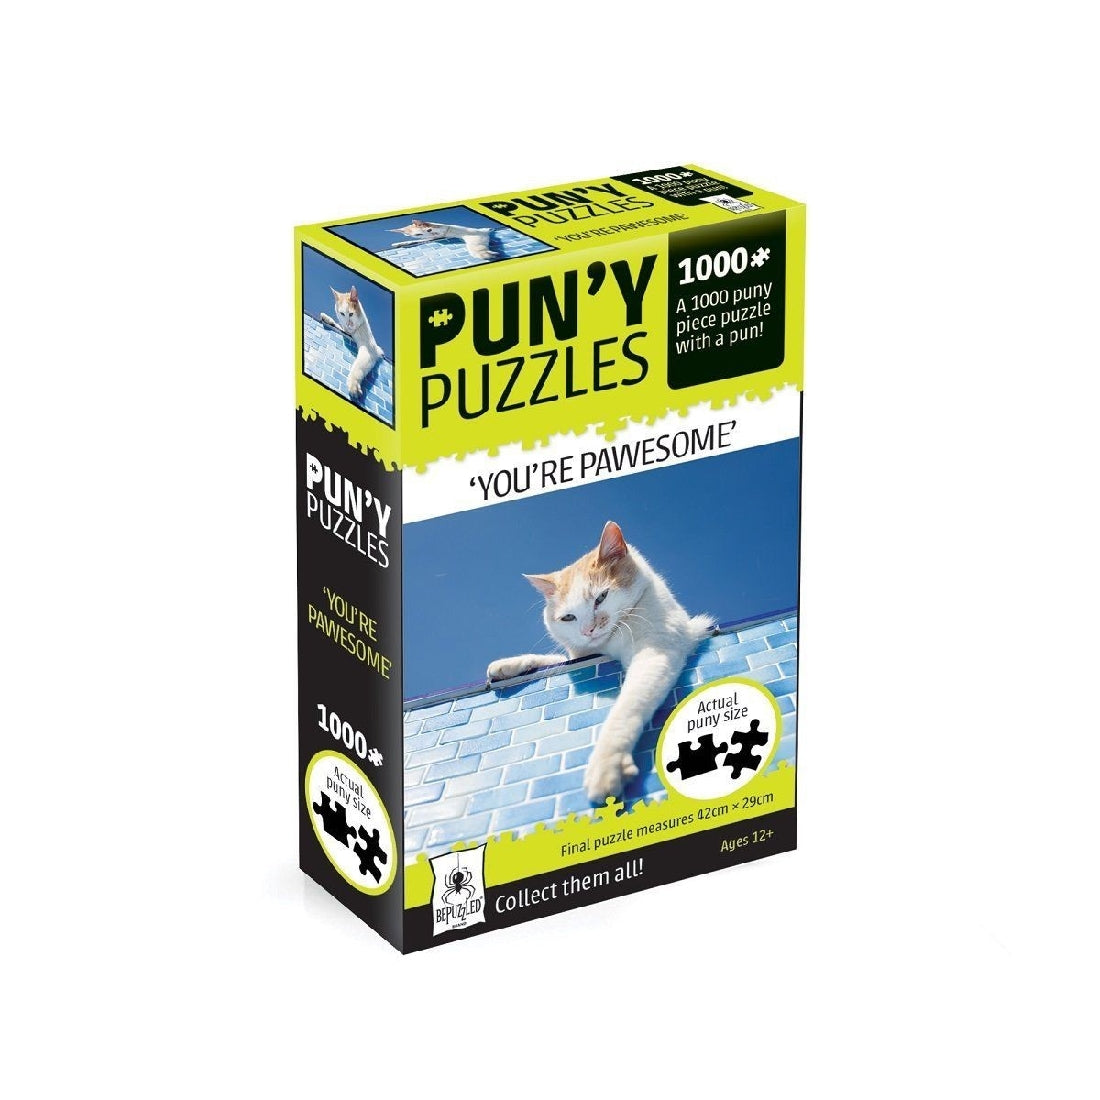 PUN'Y PUZZLE ASST - YOU'RE PAWESOME